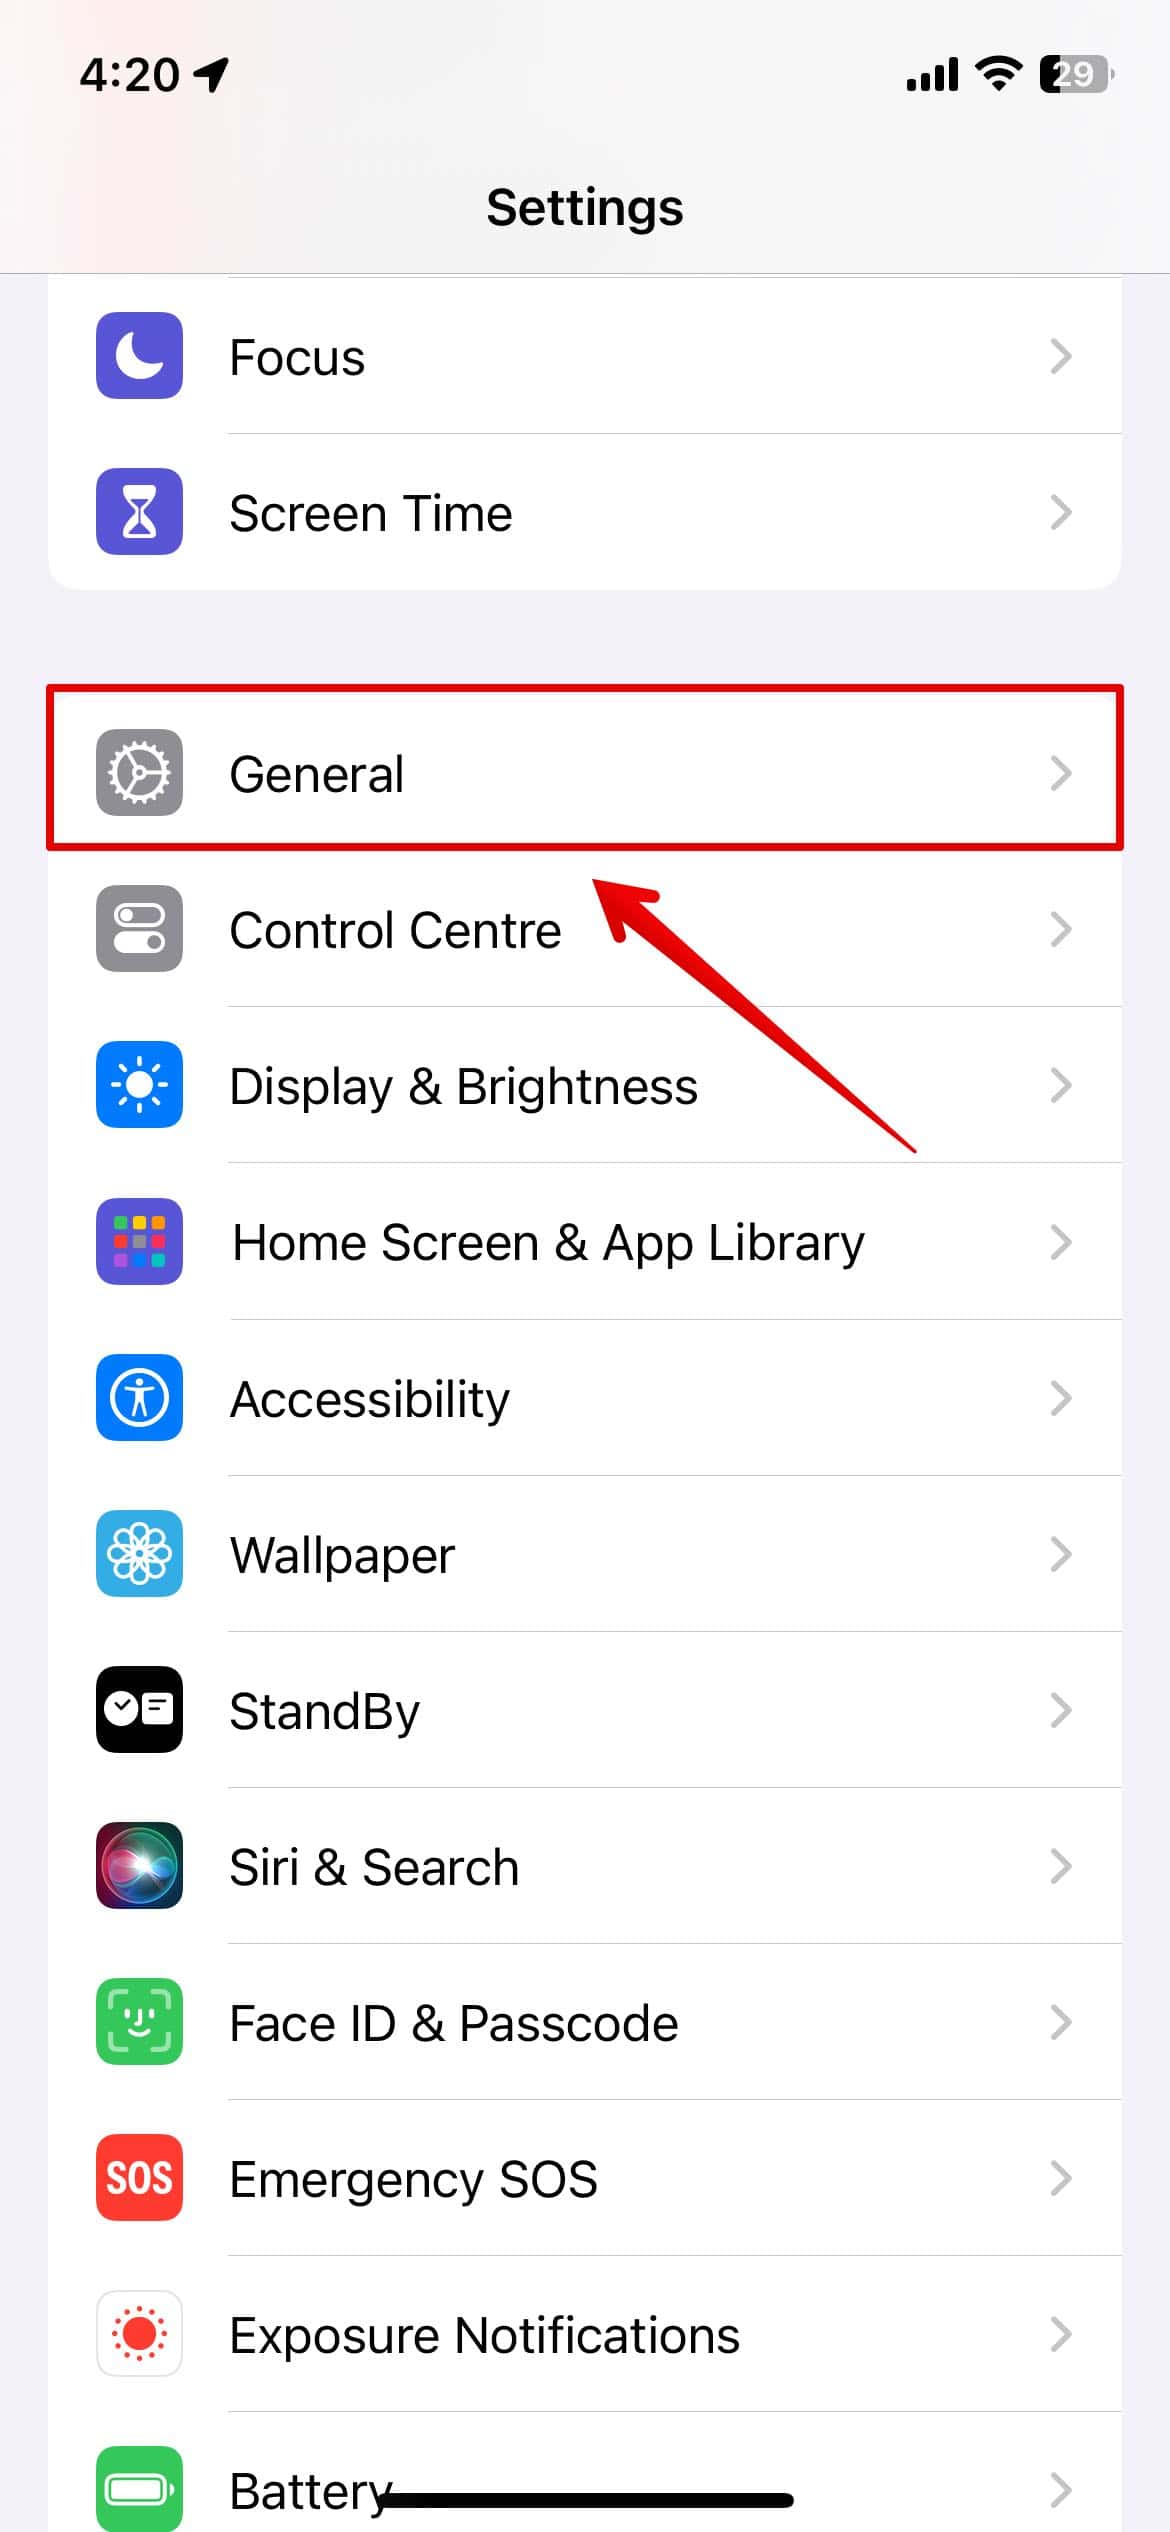 Go to Settings and open General